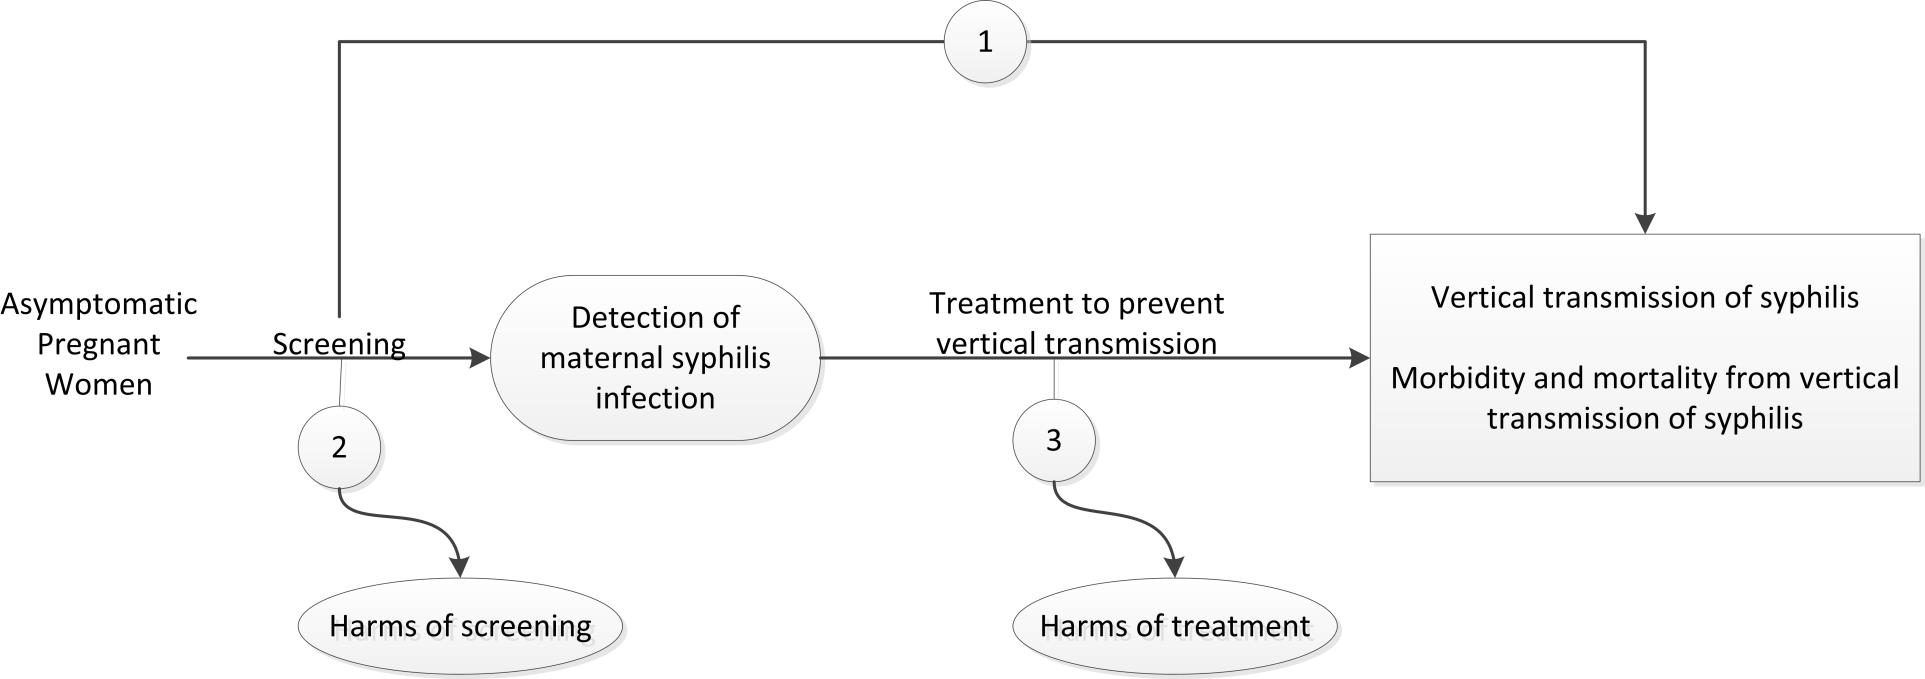 Figure 1 is the analytic framework that depicts the three Key Questions to be addressed in the systematic review. The figure illustrates how screening for syphilis infection in asymptomatic pregnant women may result in improved health outcomes, including decreased vertical transmission of syphilis and reduced maternal and infant morbidity and mortality (Key Question 1). Additionally, the figure illustrates whether screening for syphilis infection in pregnant women is associated with any harms (Key Question 2). The figure also shows whether treatment to prevent vertical transmission of syphilis is associated with any harms (Key Question 3).